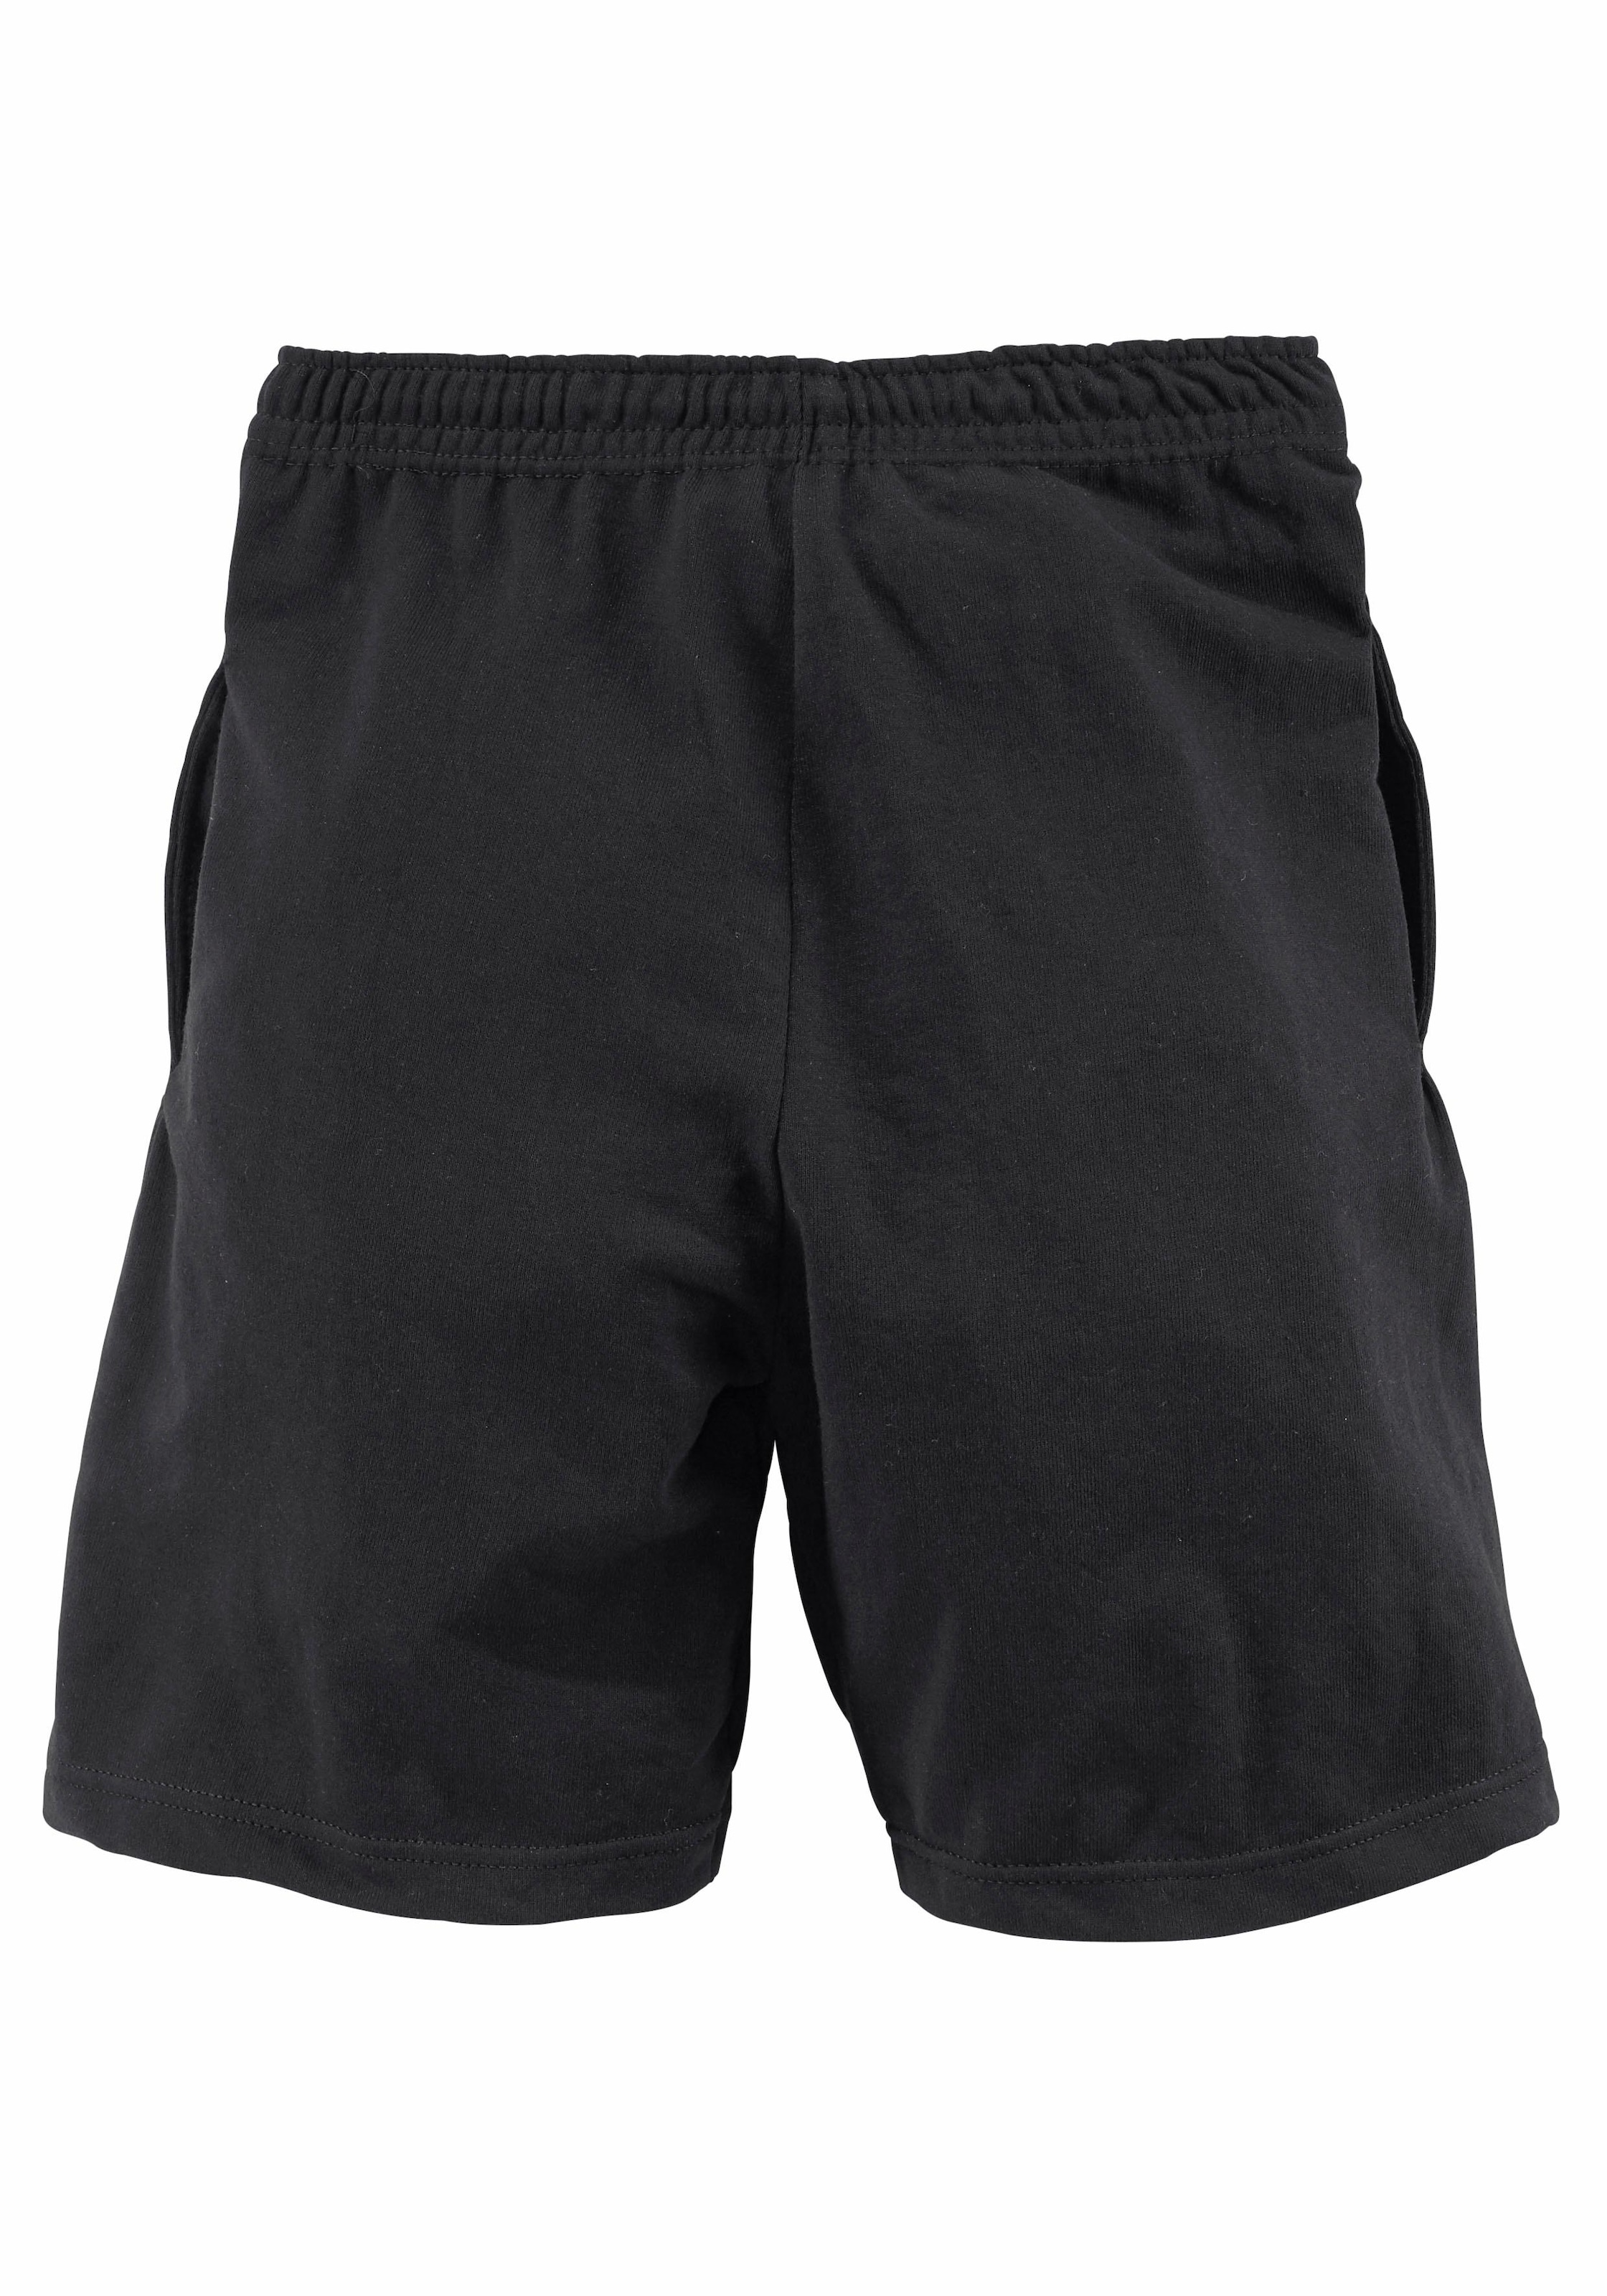 Fruit of the Loom Sweatshorts, in bequemer Form